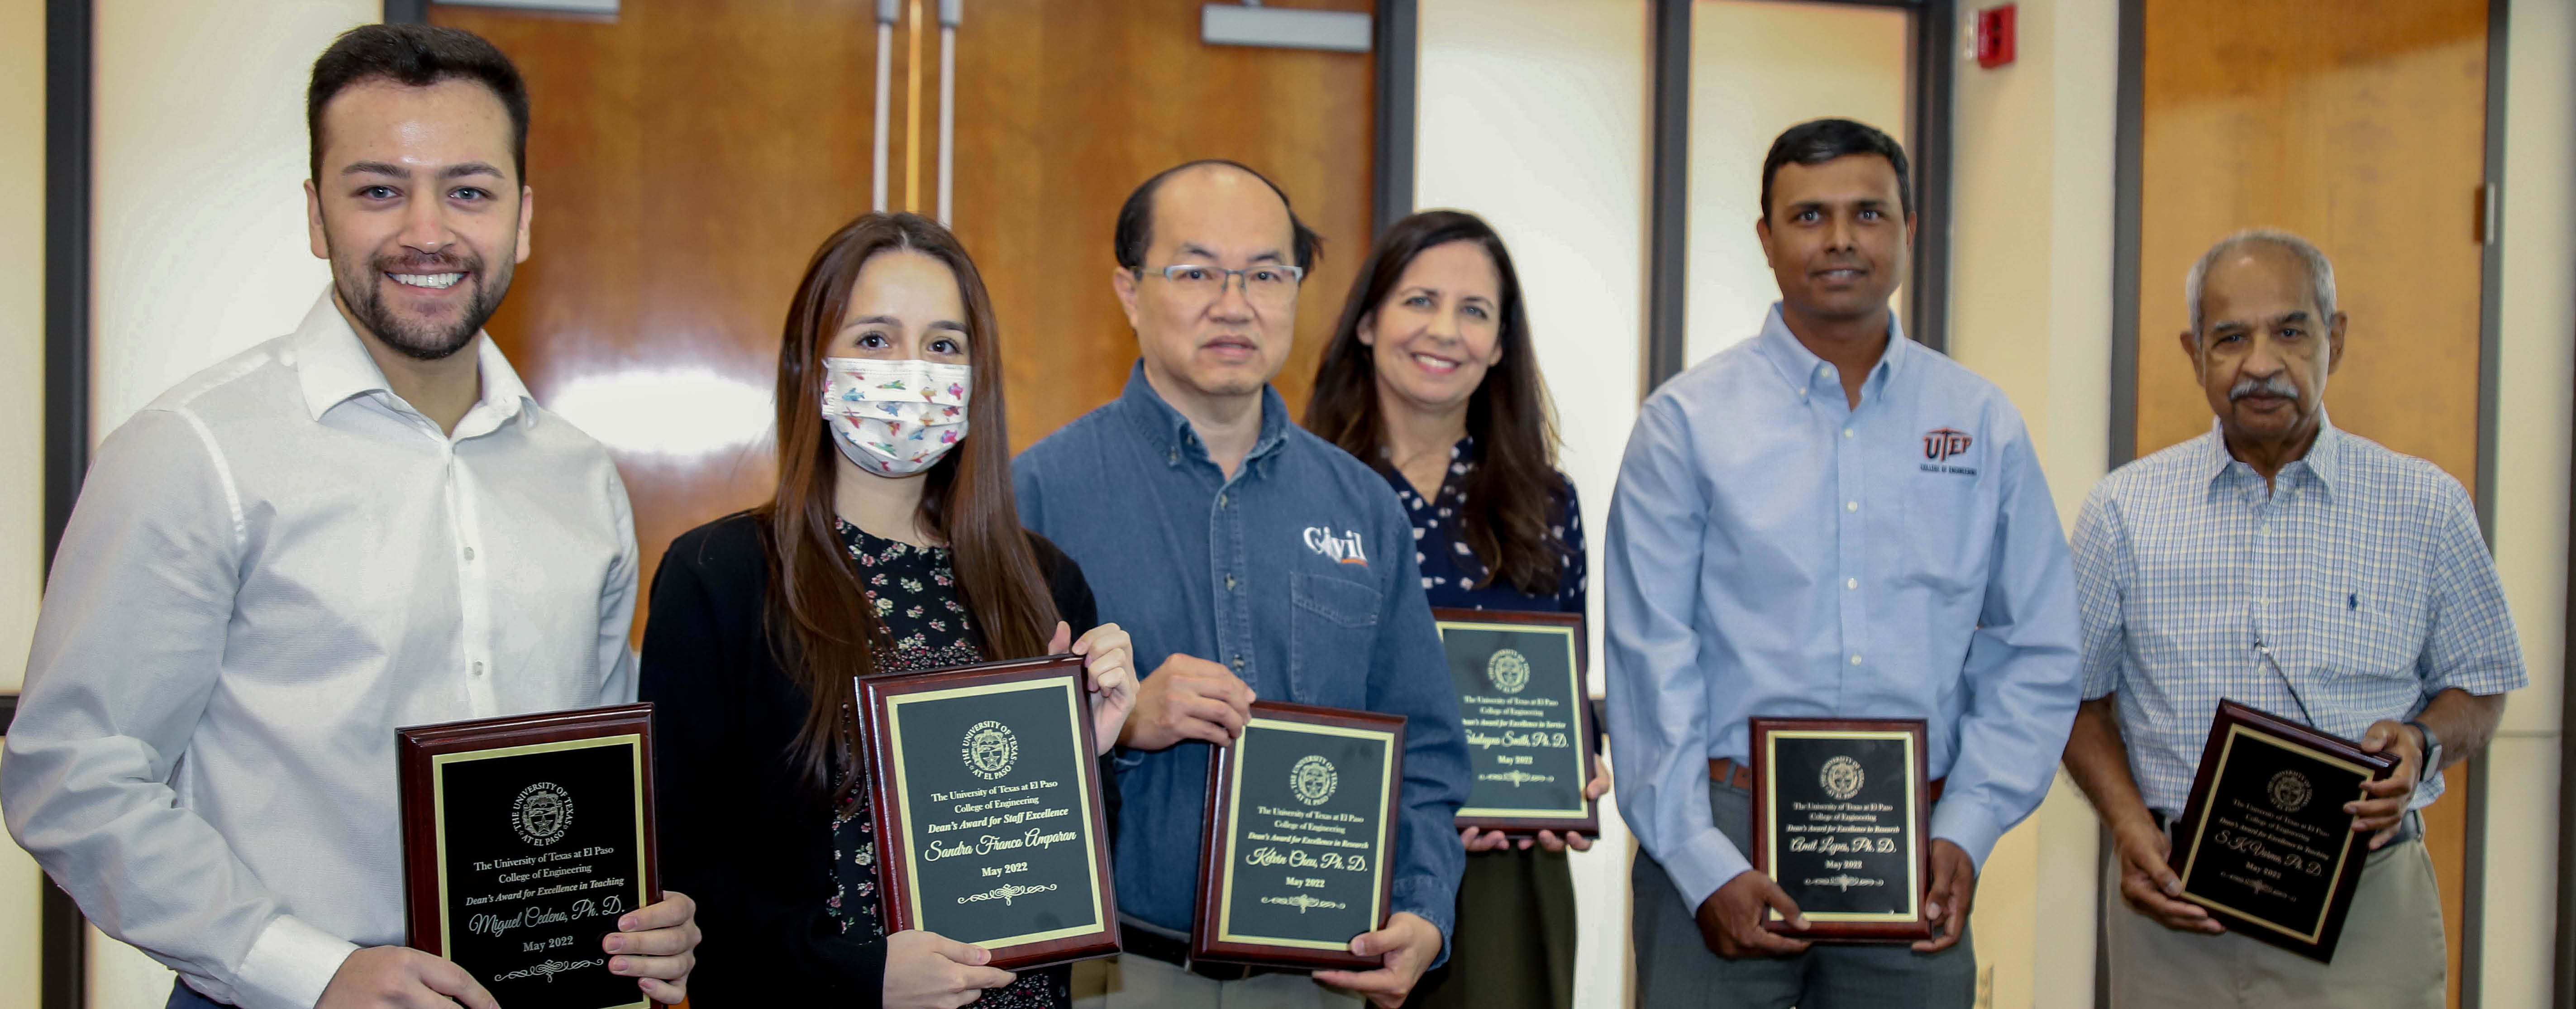 Engineering Faculty, Staff, Students Recognized at Annual Meeting 